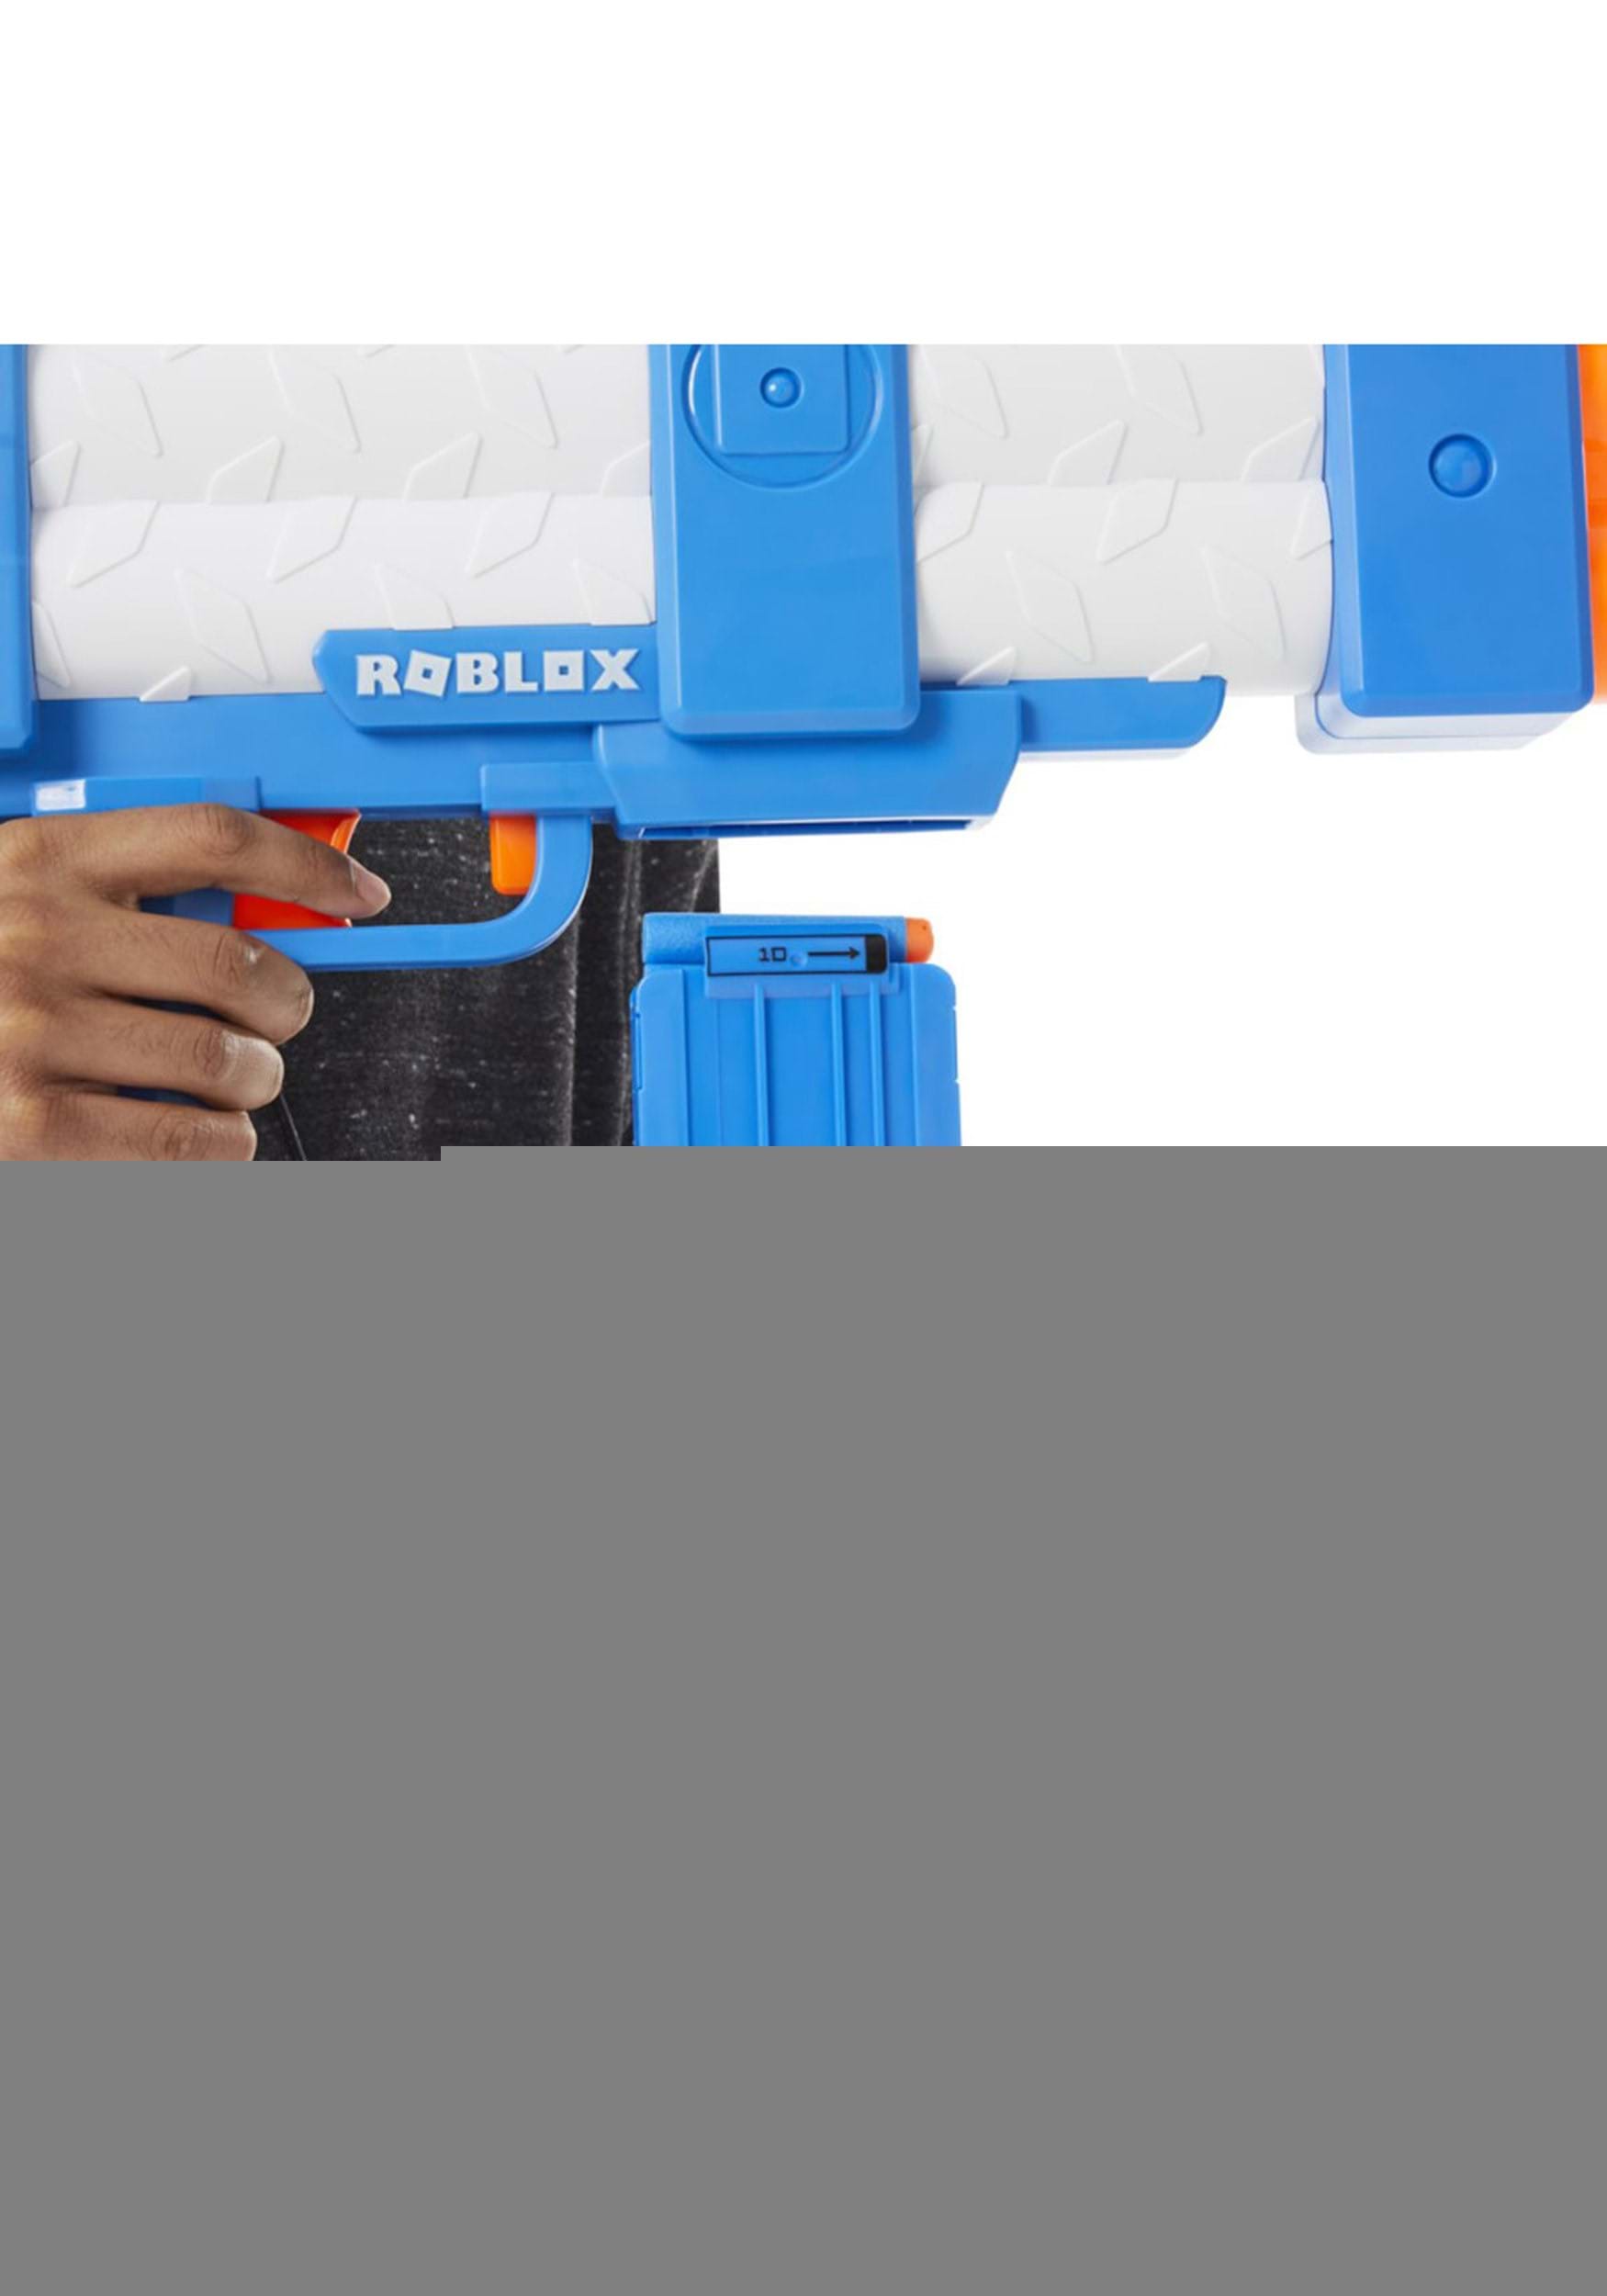 All Roblox Nerf Guns & Blasters Listed (With Pictures)